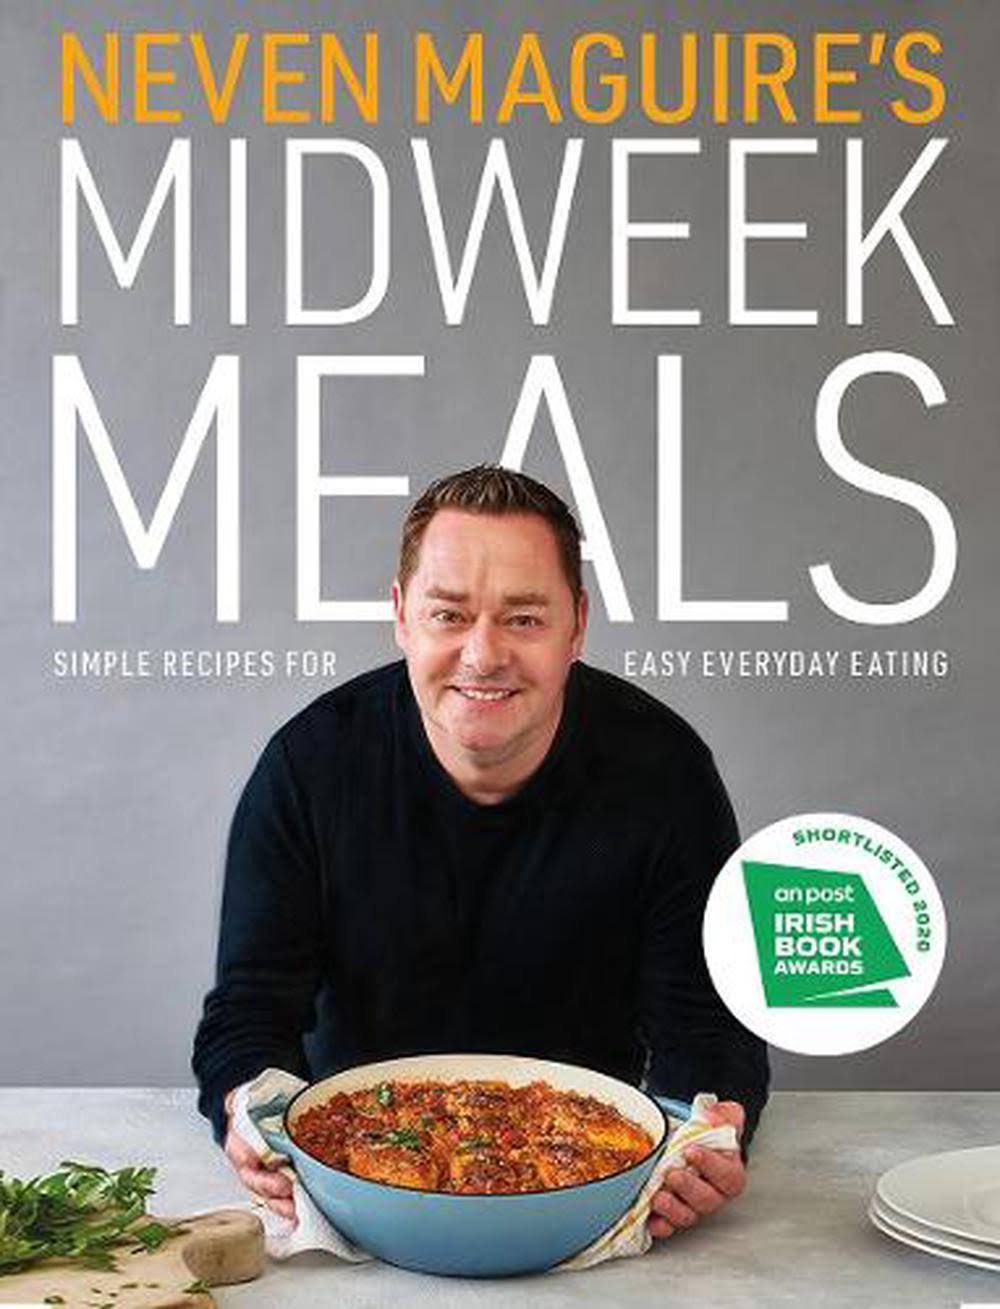 Neven Maguire's Midweek Meals by Neven Maguire